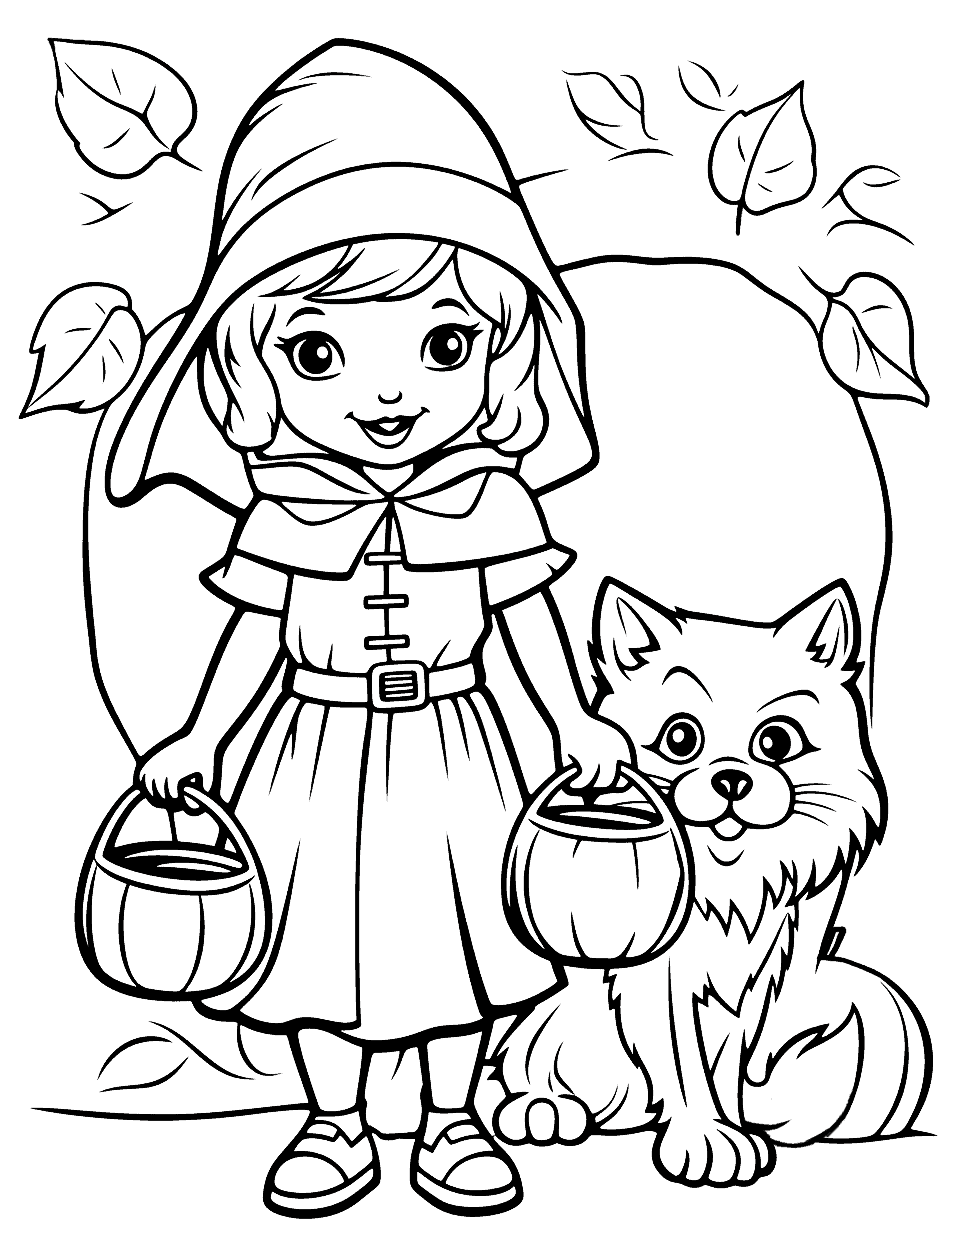 Little Red Riding Hood and the Werewolf Halloween Coloring Page - A twist on the classic tale featuring Little Red Riding Hood and a friendly werewolf.